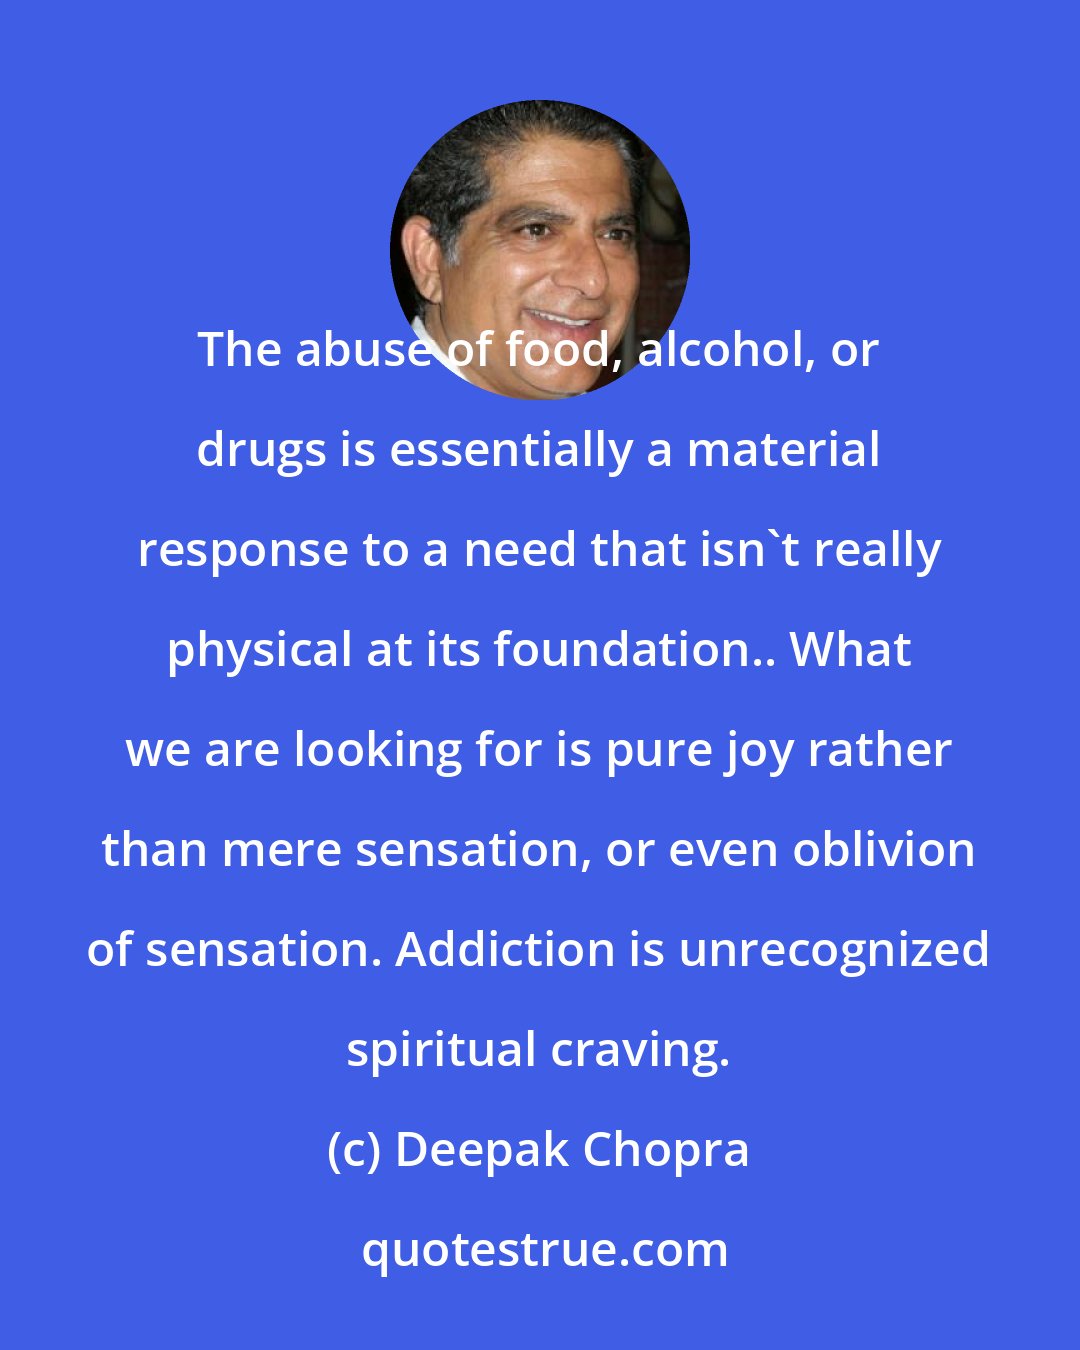 Deepak Chopra: The abuse of food, alcohol, or drugs is essentially a material response to a need that isn't really physical at its foundation.. What we are looking for is pure joy rather than mere sensation, or even oblivion of sensation. Addiction is unrecognized spiritual craving.